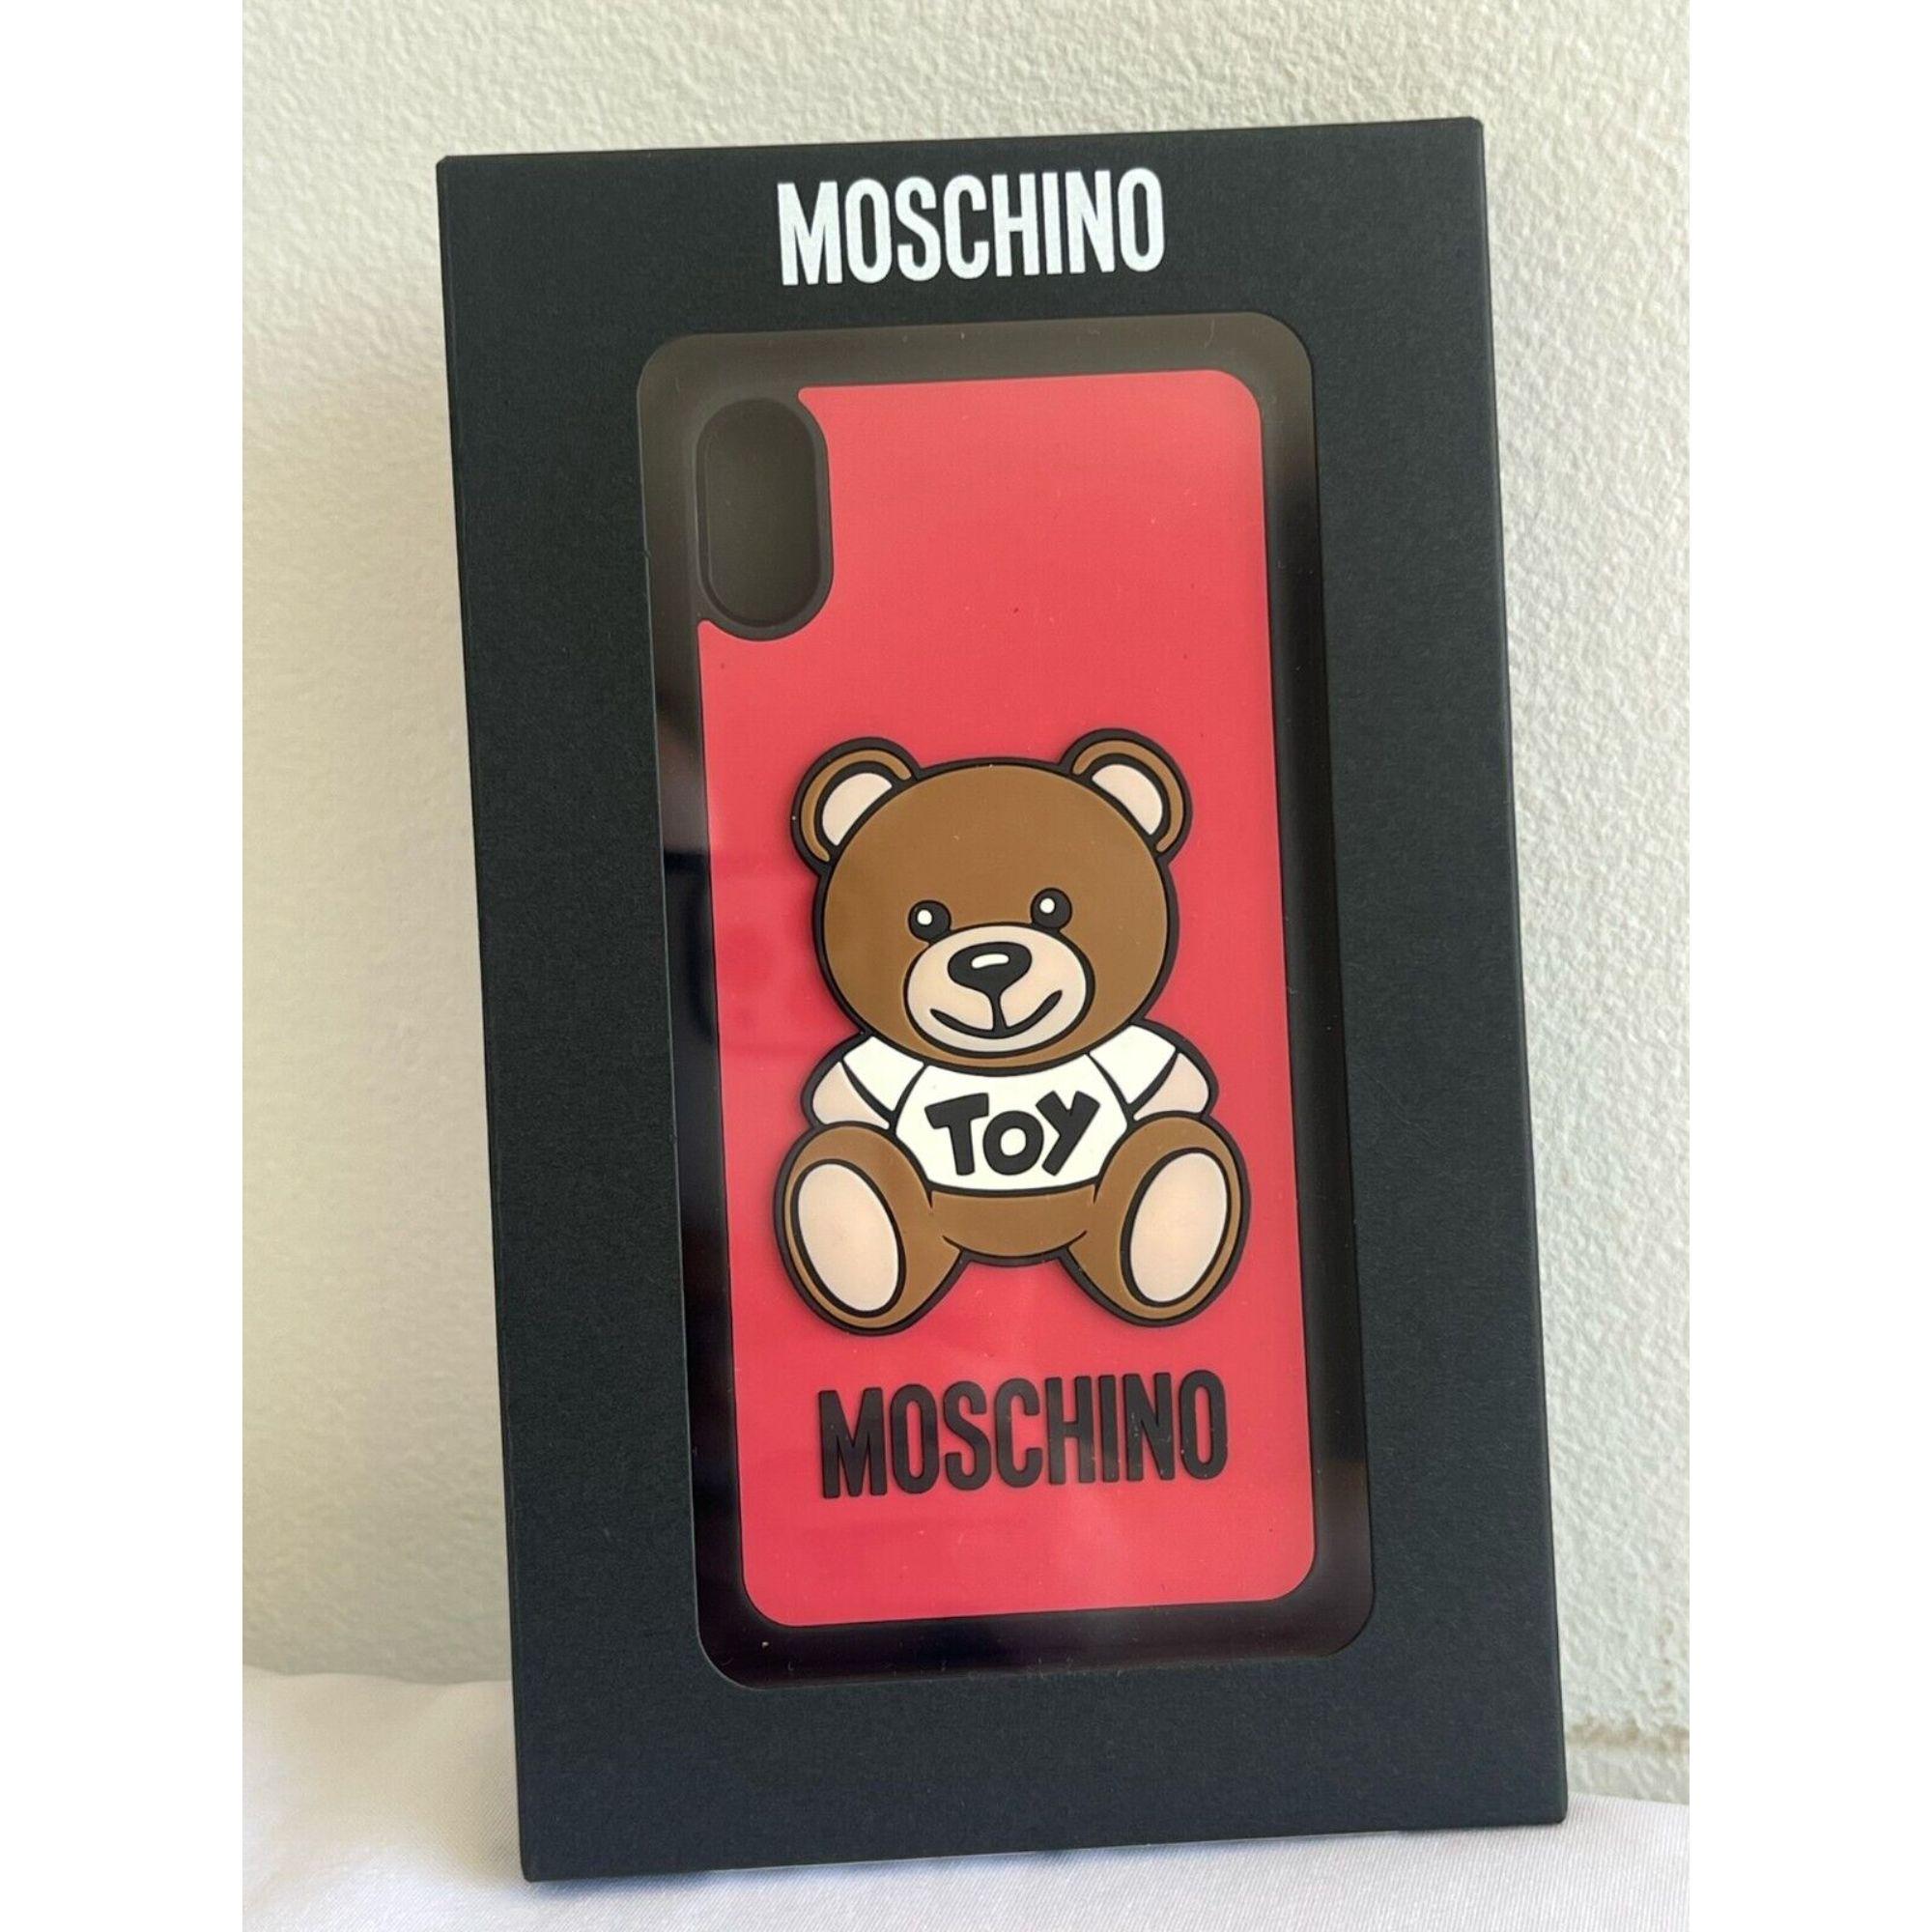 SS21 Moschino Couture Jeremy Scott Red iPhone XS Max Case with Teddy Bear Toy

Additional Information:
Material: 40% PVC, 40% Policarbonato, 20% PU
Color: Red, Black, White, Brown
Size: One Size
Pattern: Solid, 3D Logo Details, 3D Teddy